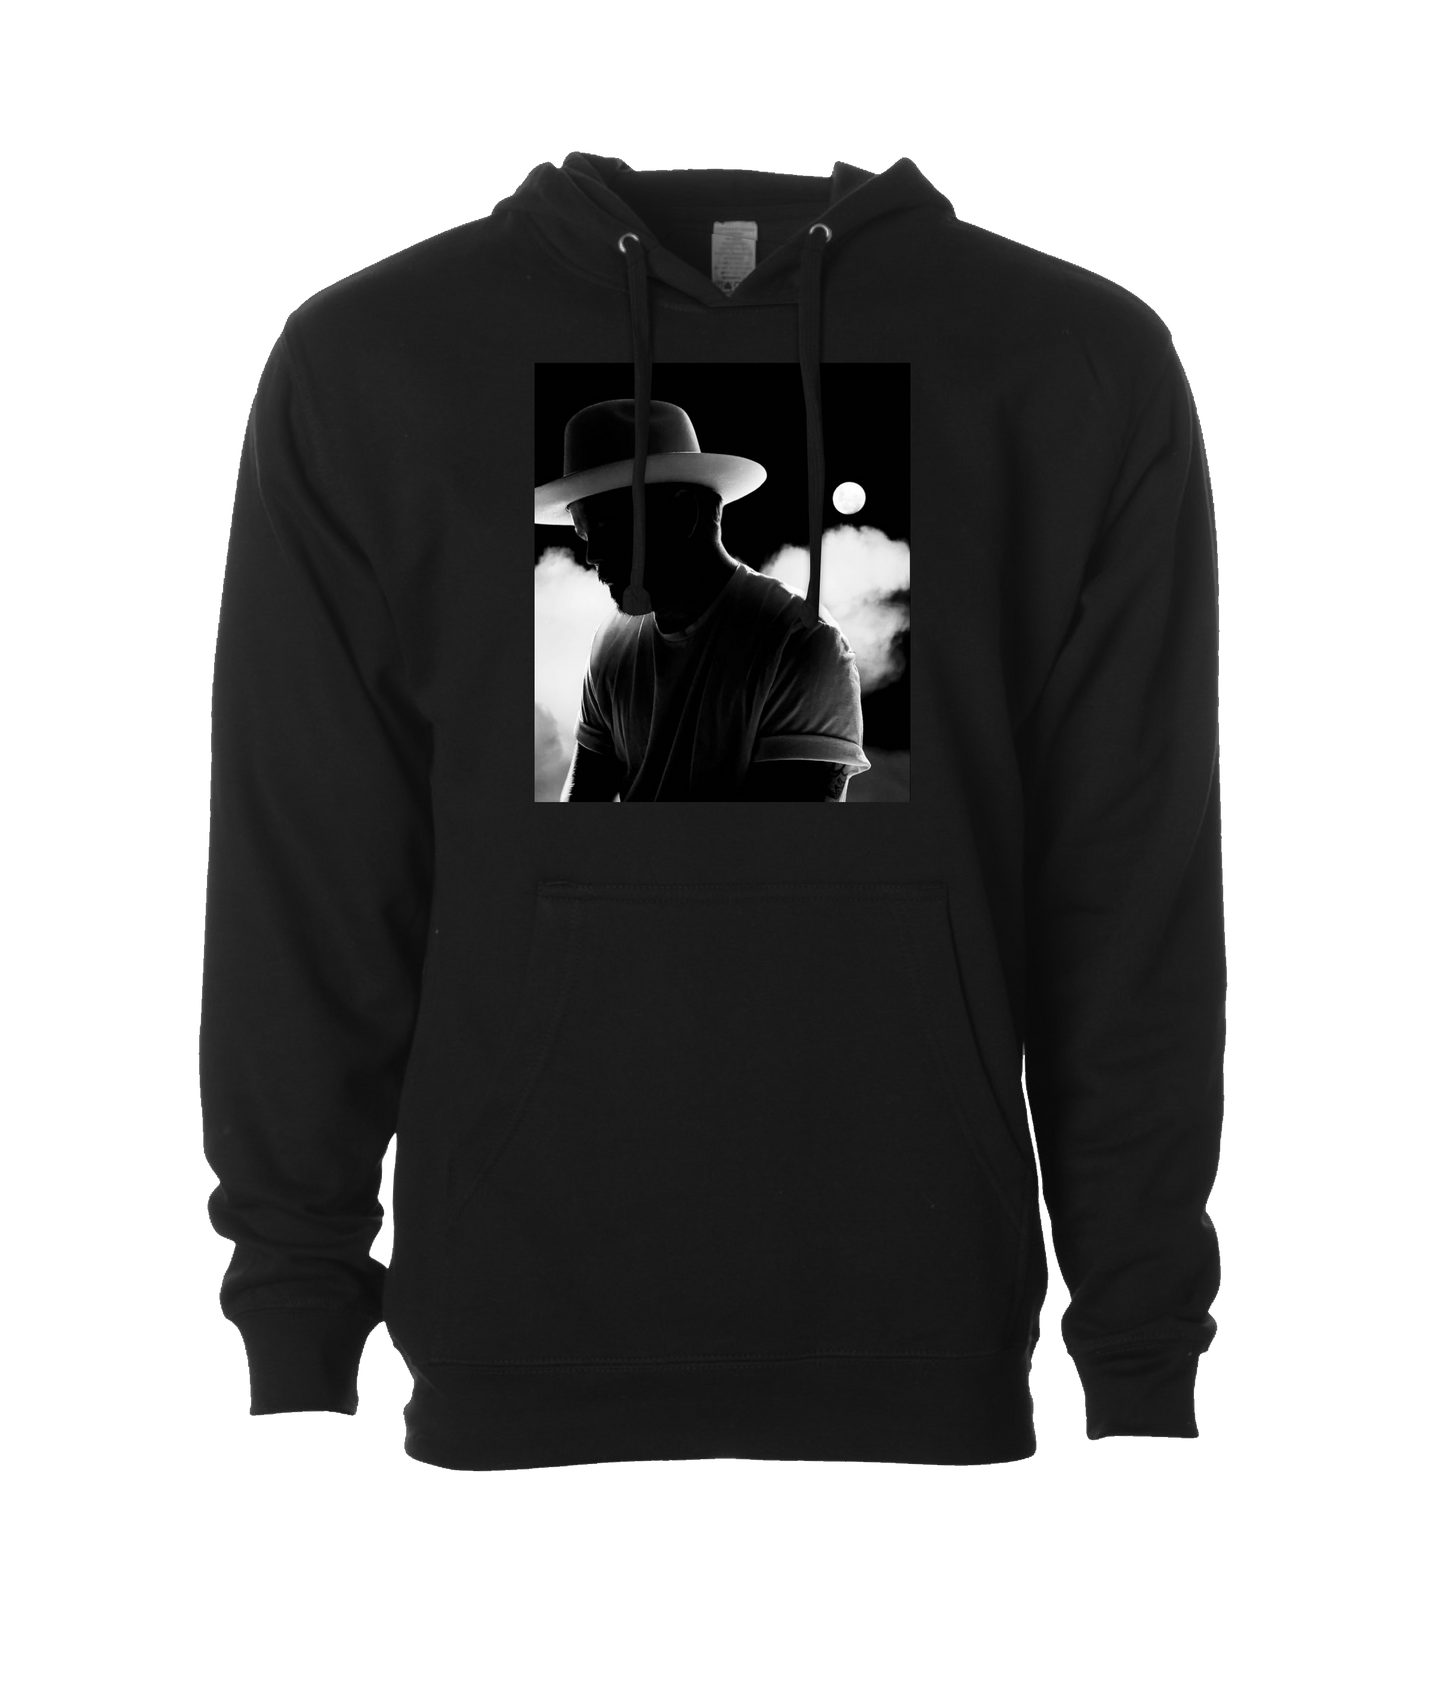 Andy Crosby Music - Holy Vices - Black Hoodie